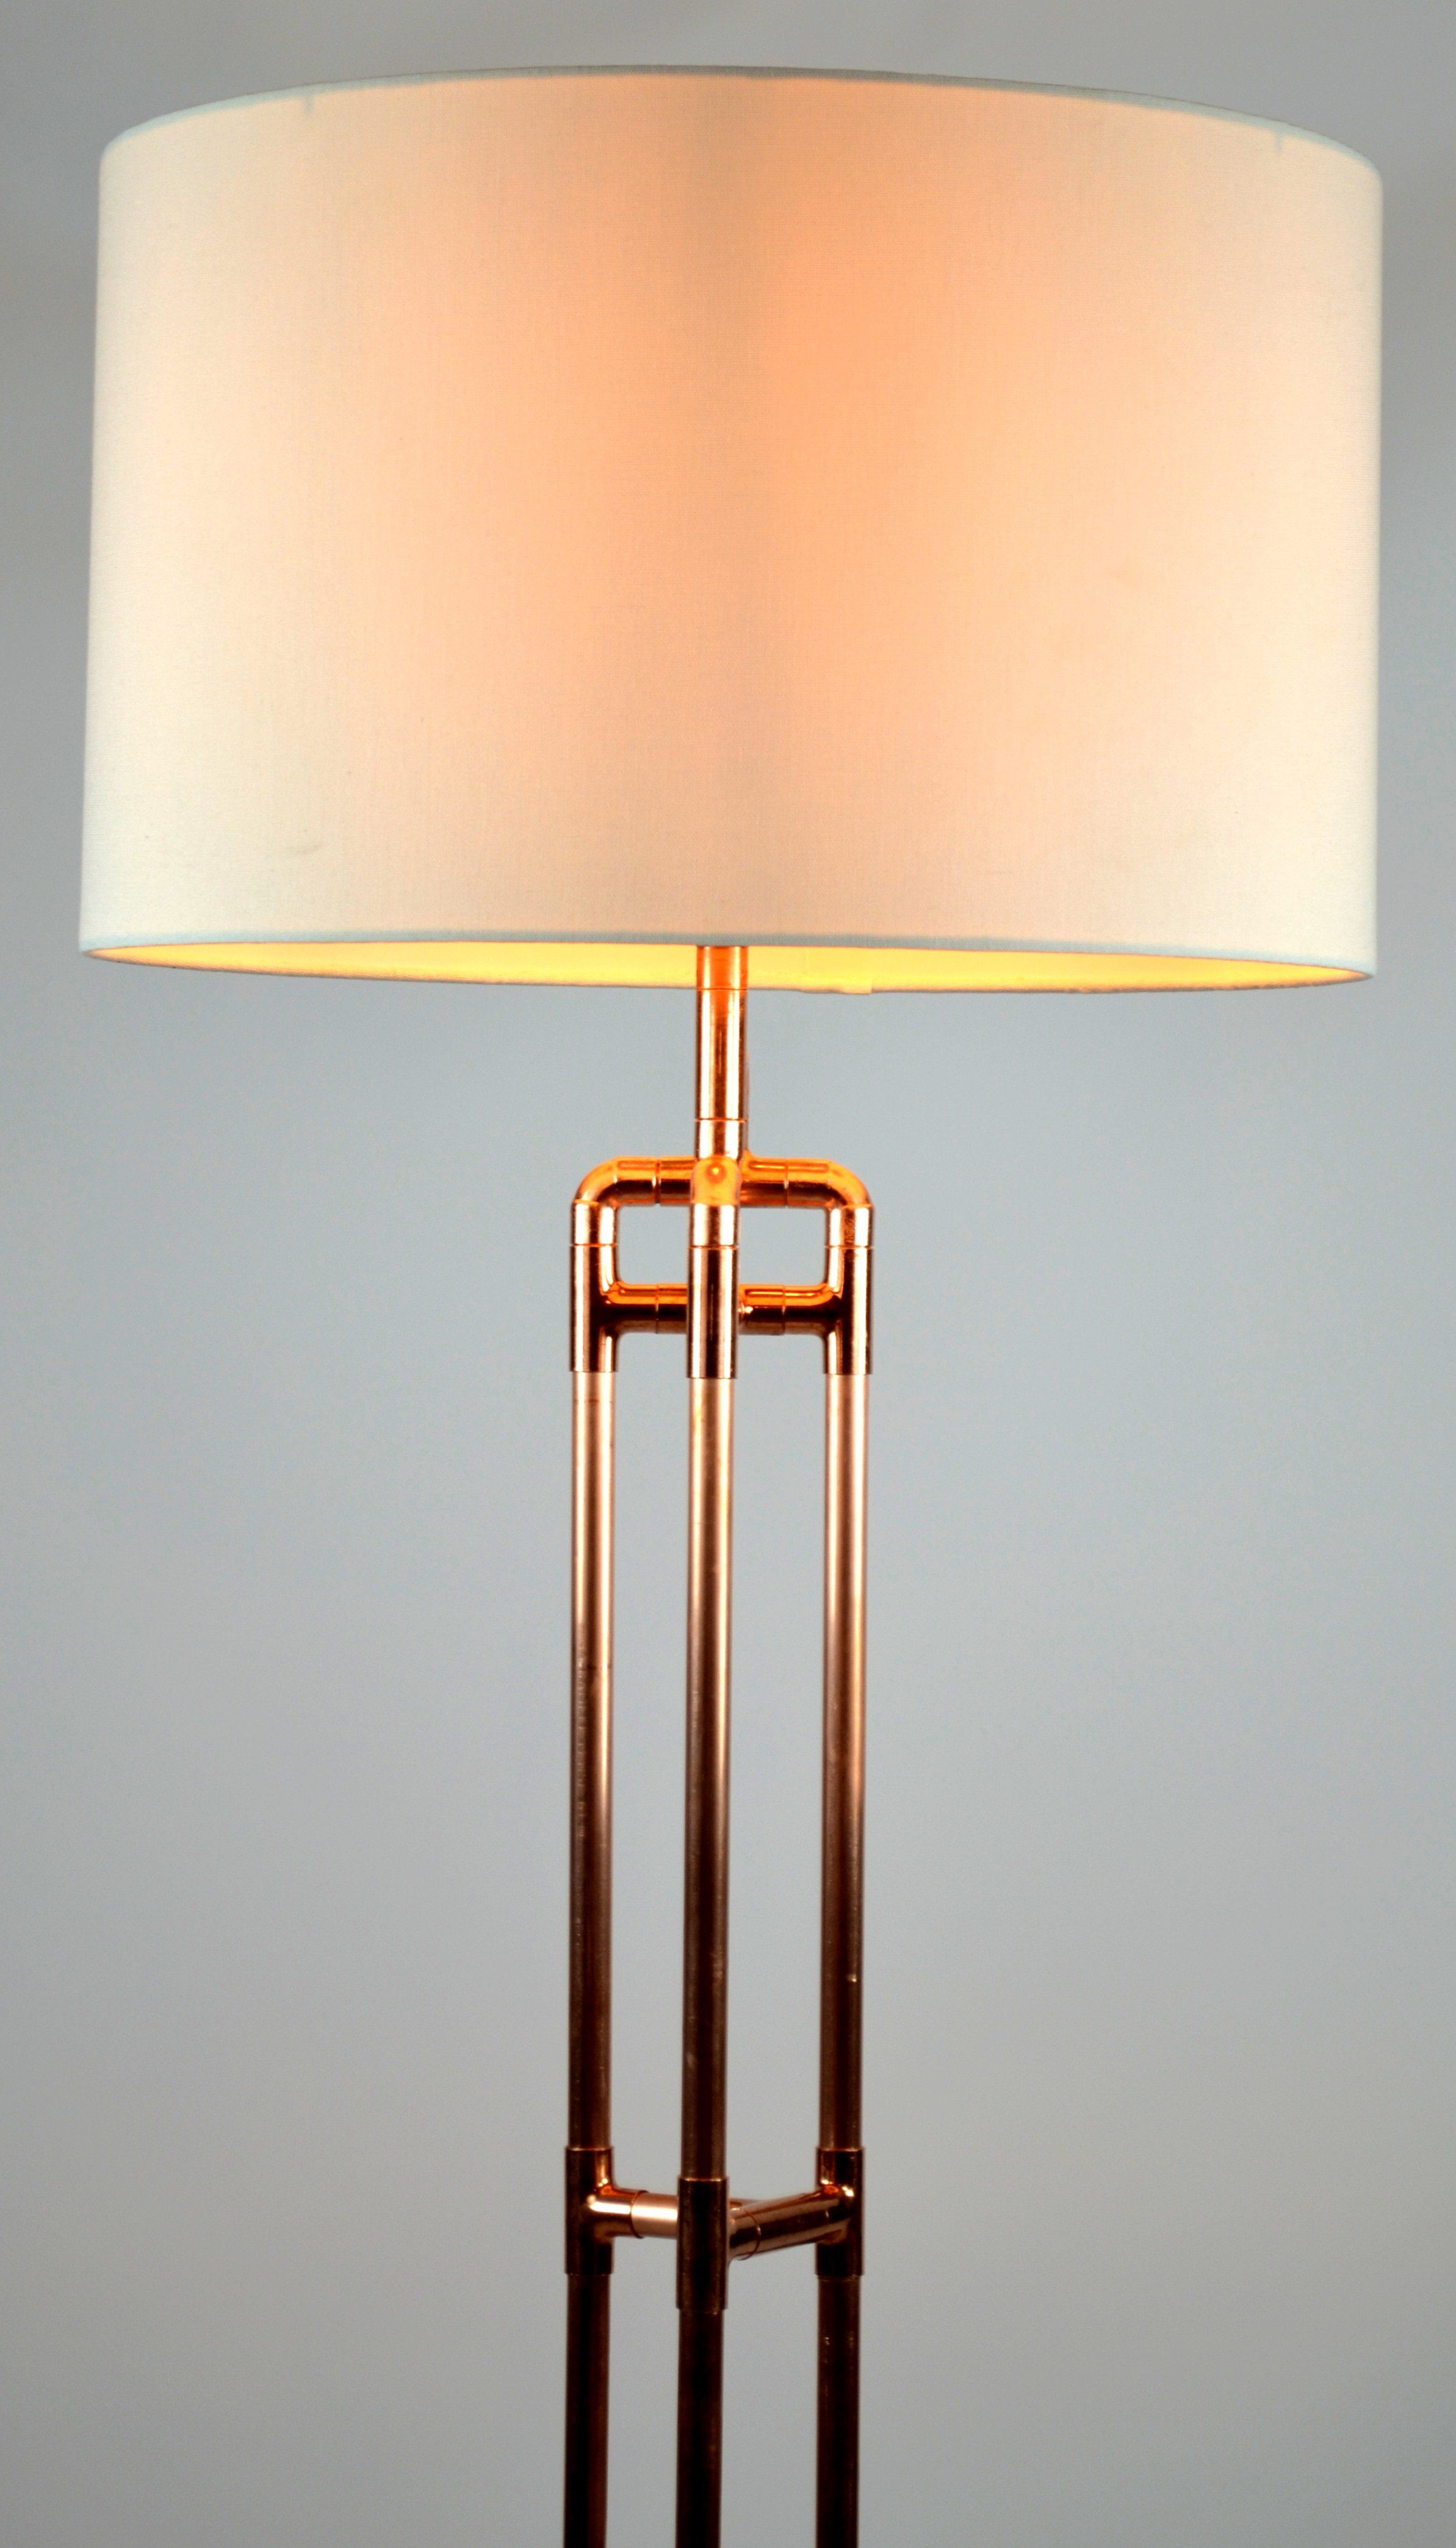 Tri Tower Copper Floor Lamp Base pertaining to size 2386 X 4175